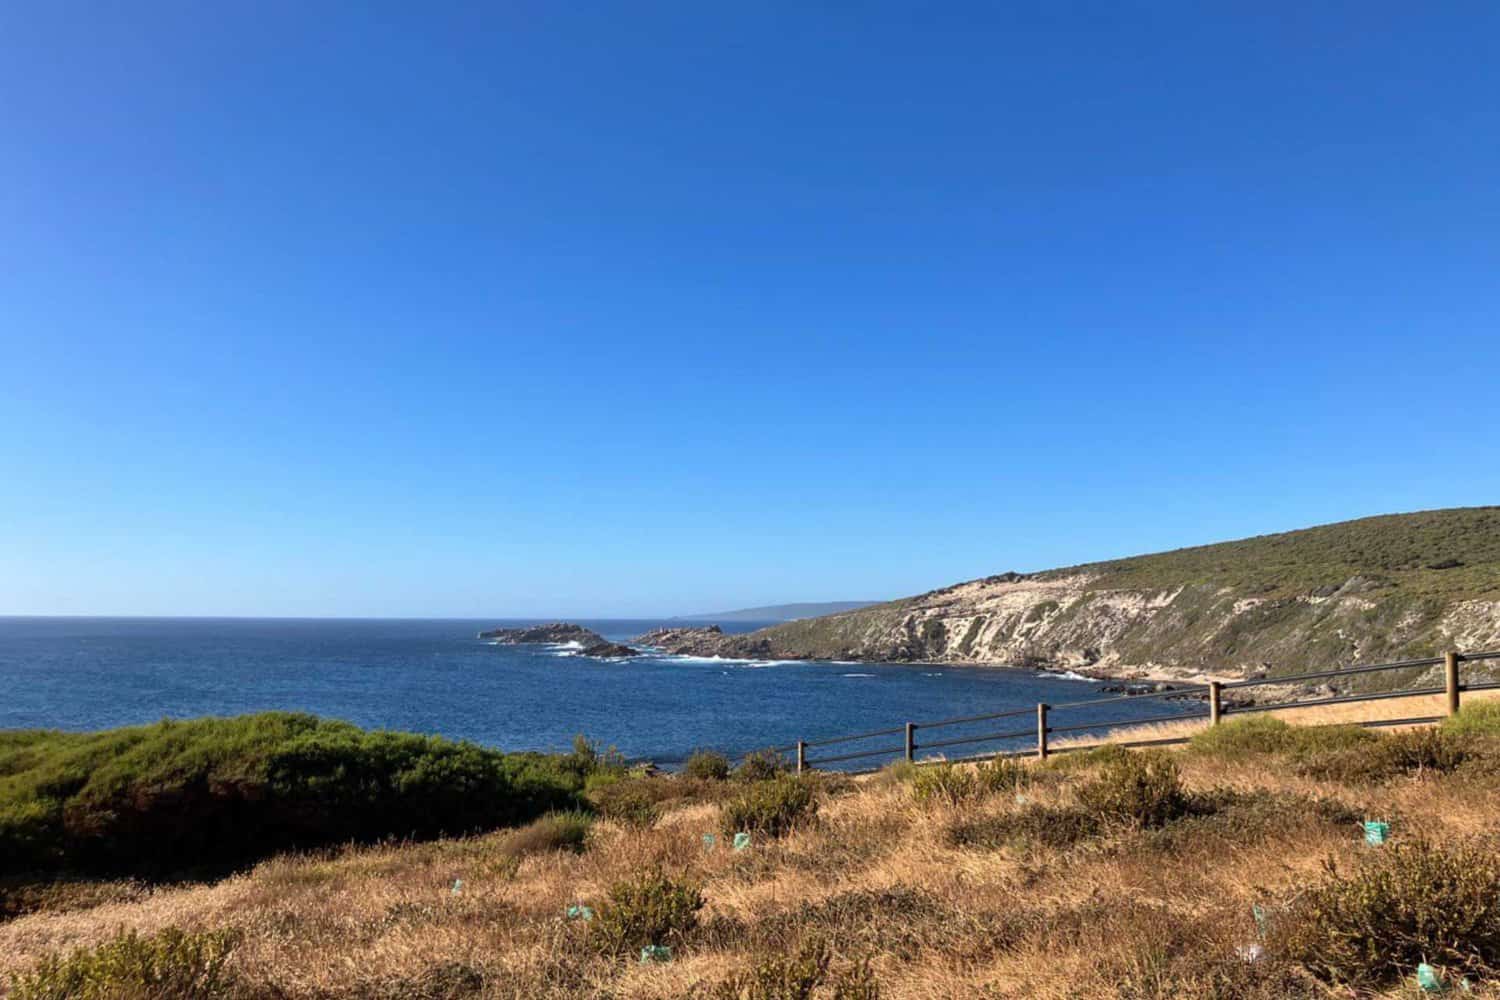 Panoramic view of the rugged coastline at Yallingup, featuring undulating cliffs and native shrubbery against a backdrop of the clear blue Indian Ocean under a bright azure sky.